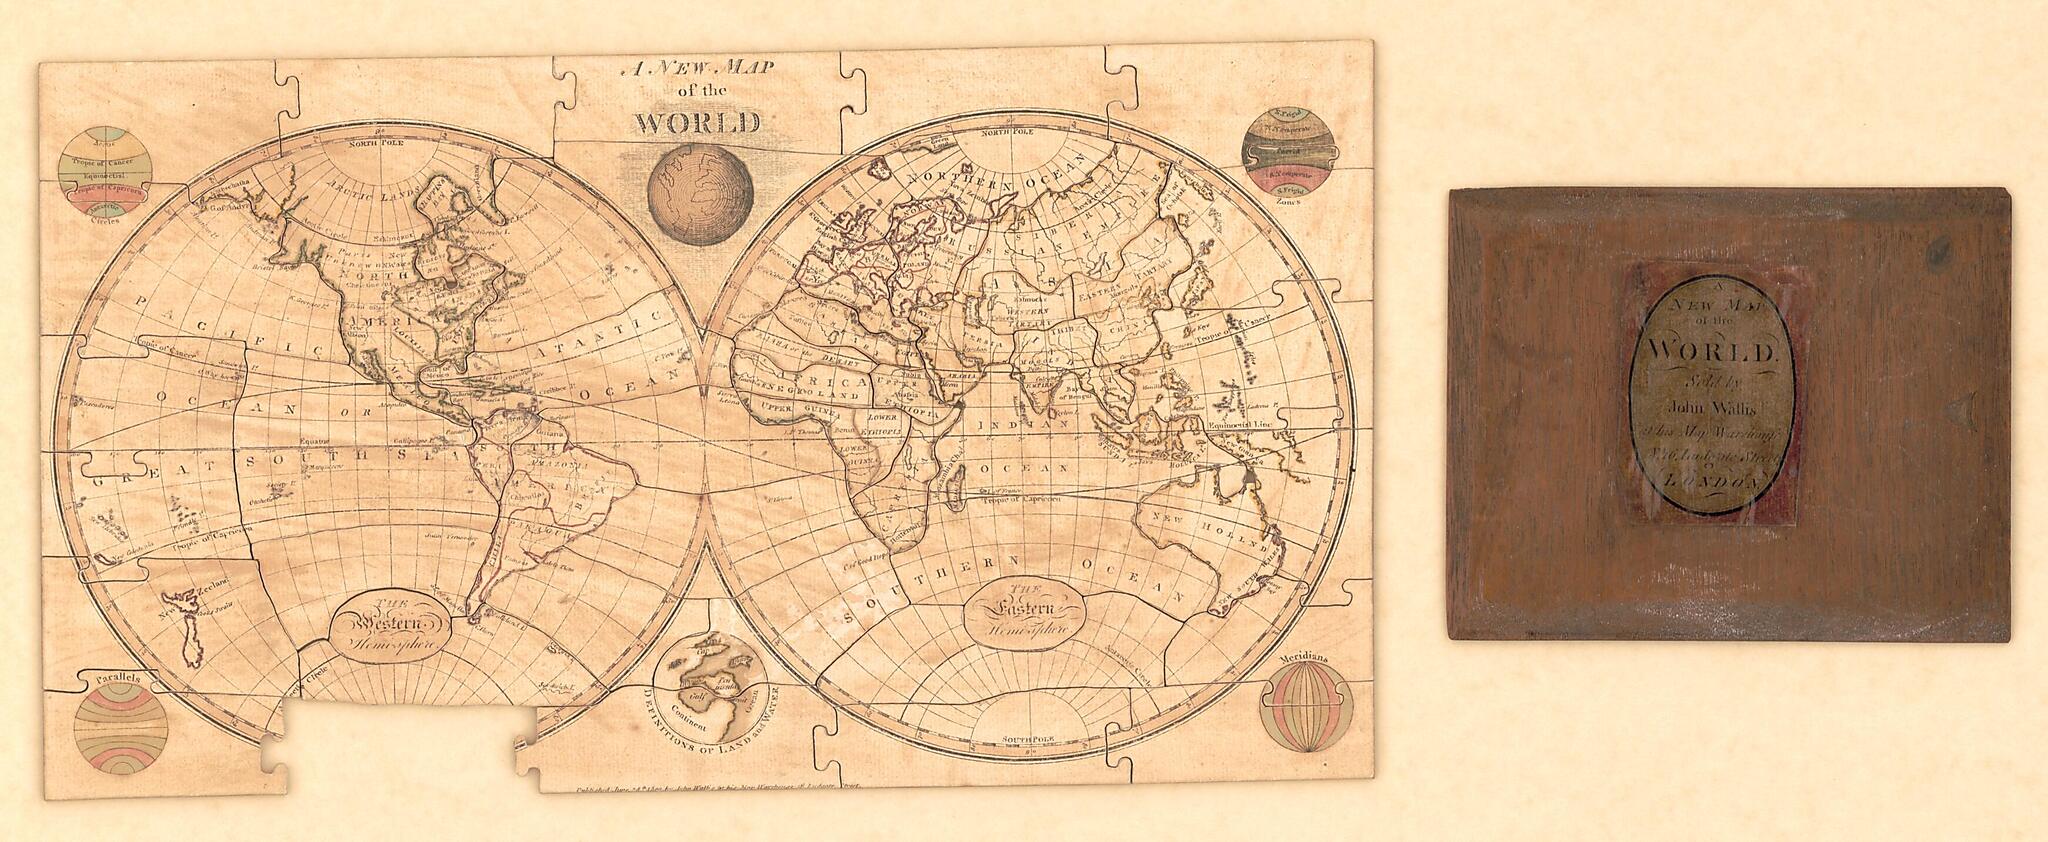 This old map of A New Map of the World from 1800 was created by J. (John) Wallis in 1800